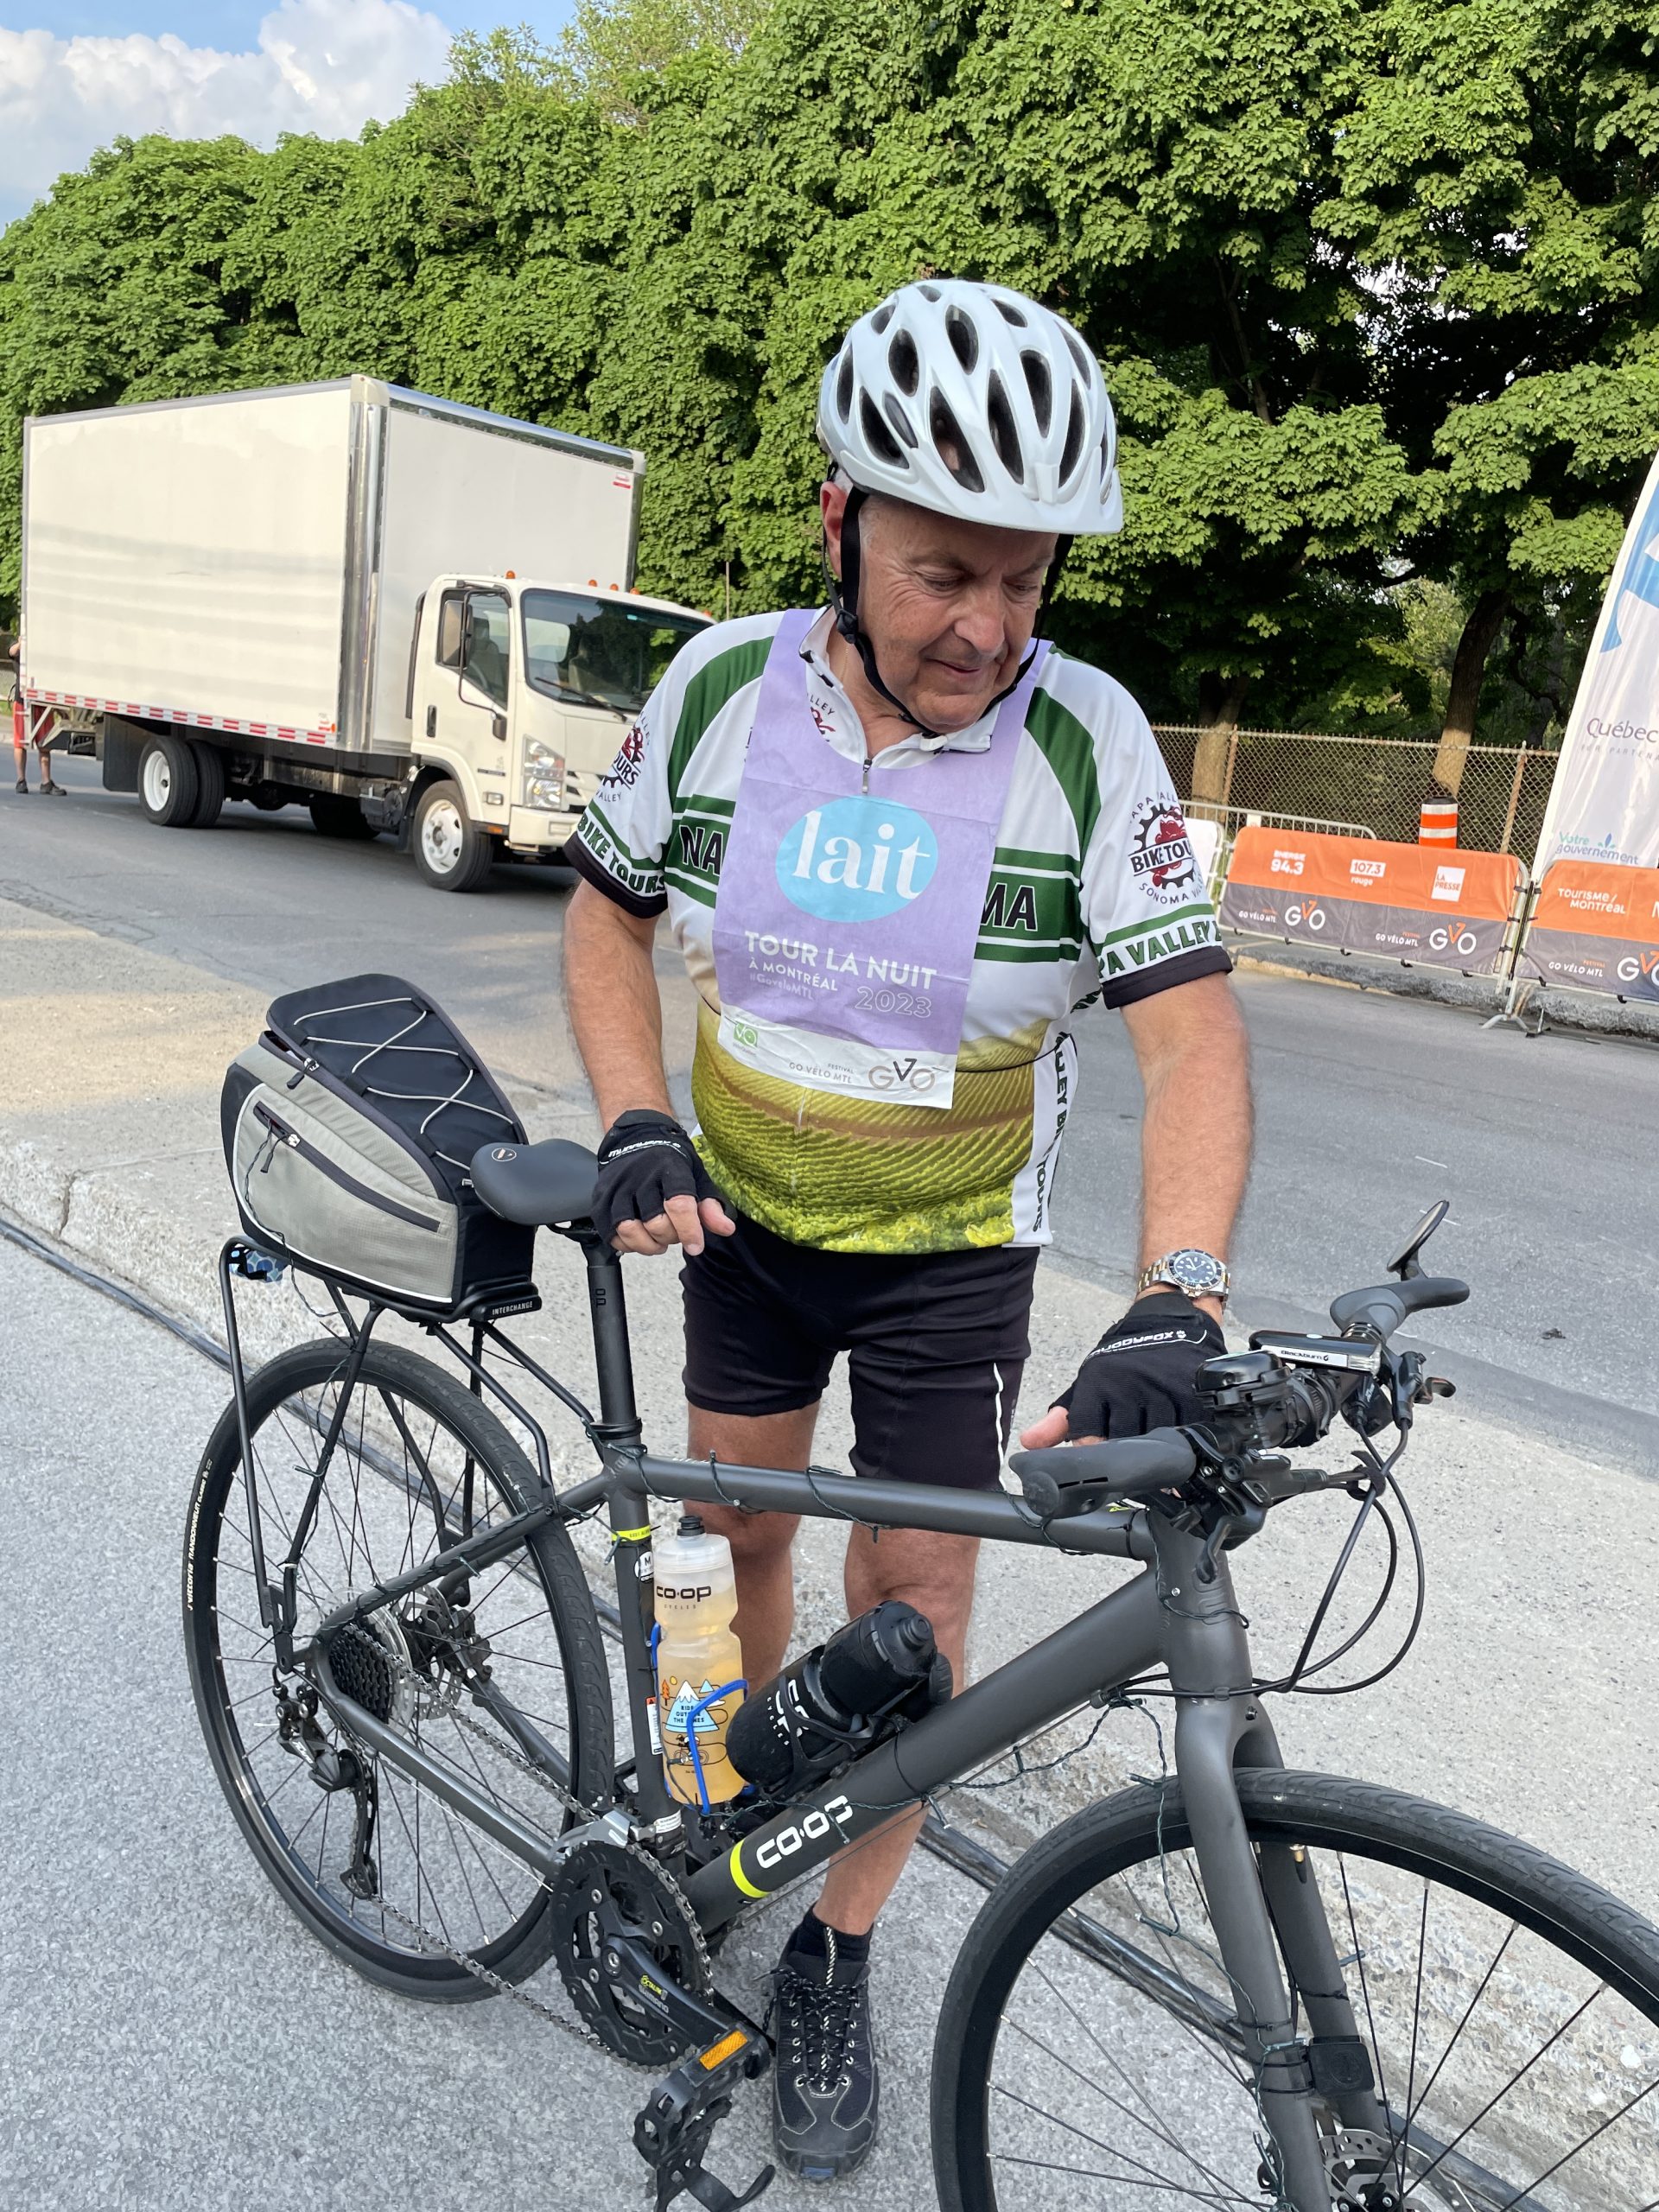 Ron Scardacchi has taken part in 7 Tour La Nuit’s driving all the way from Connecticut, USA